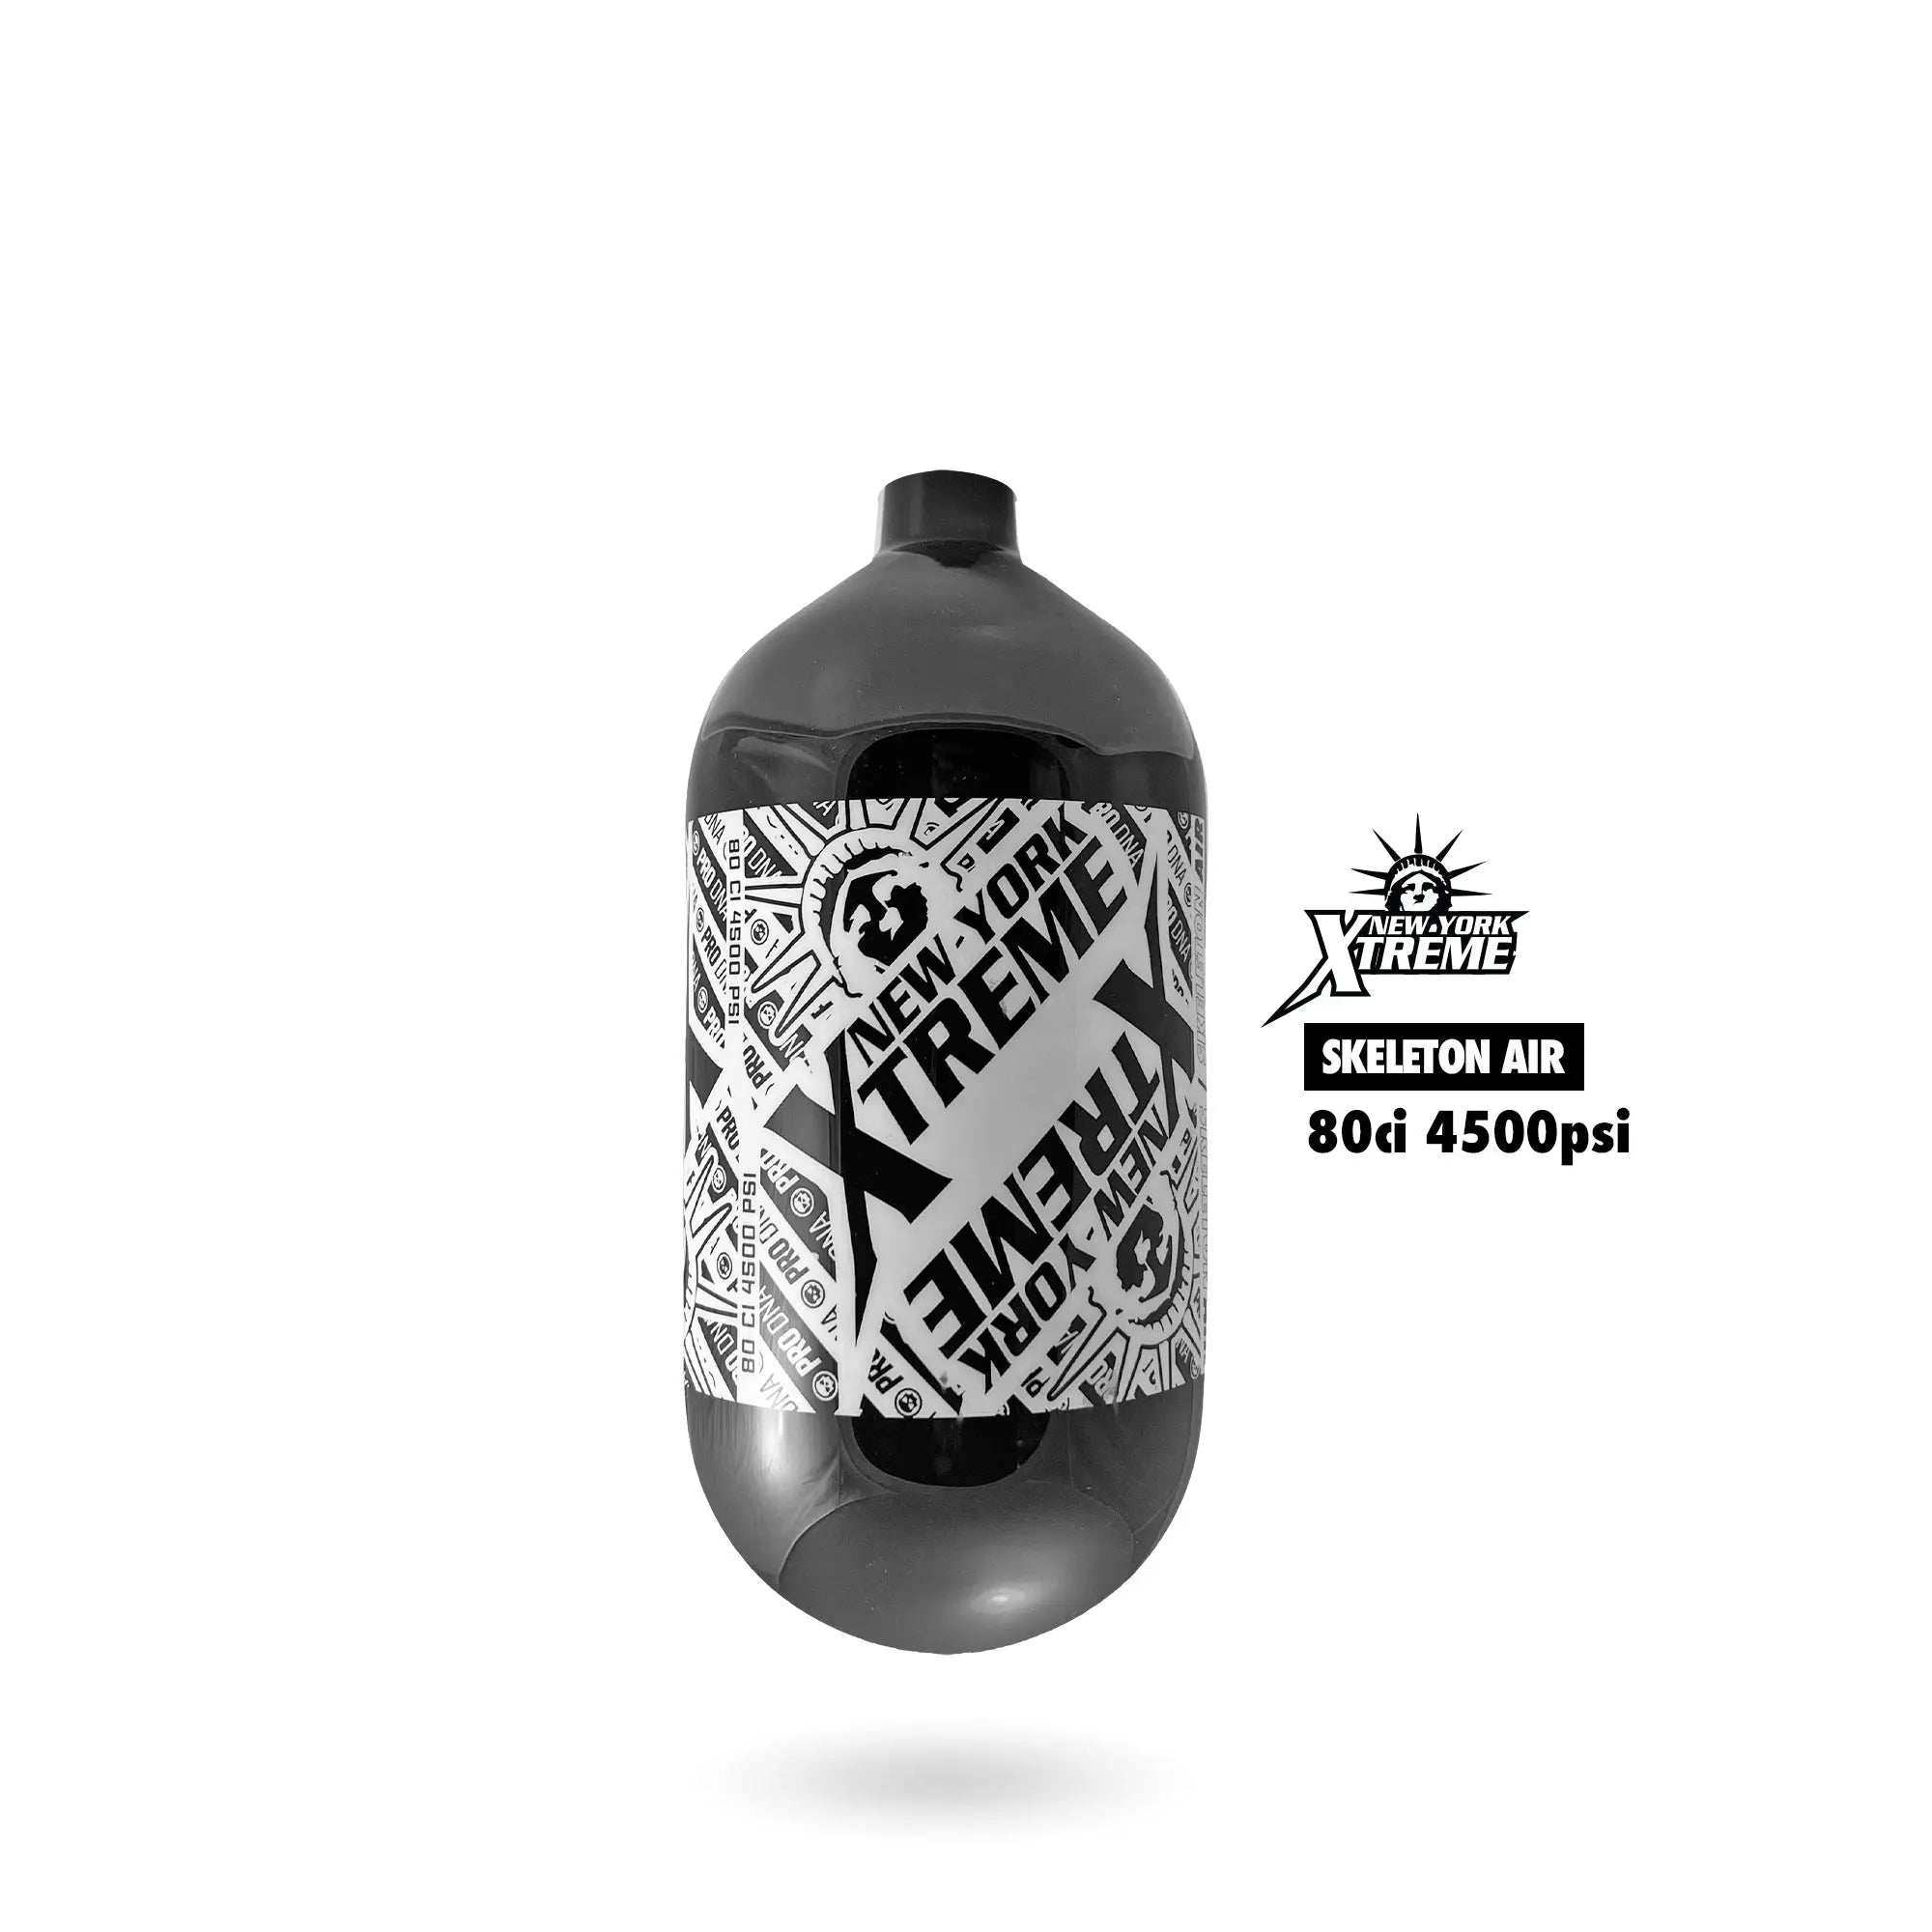 "TEAM SERIES" NYX AIR TANK (BOTTLE ONLY) 80ci / 4500psi - LIMITED EDITION Infamous Paintball